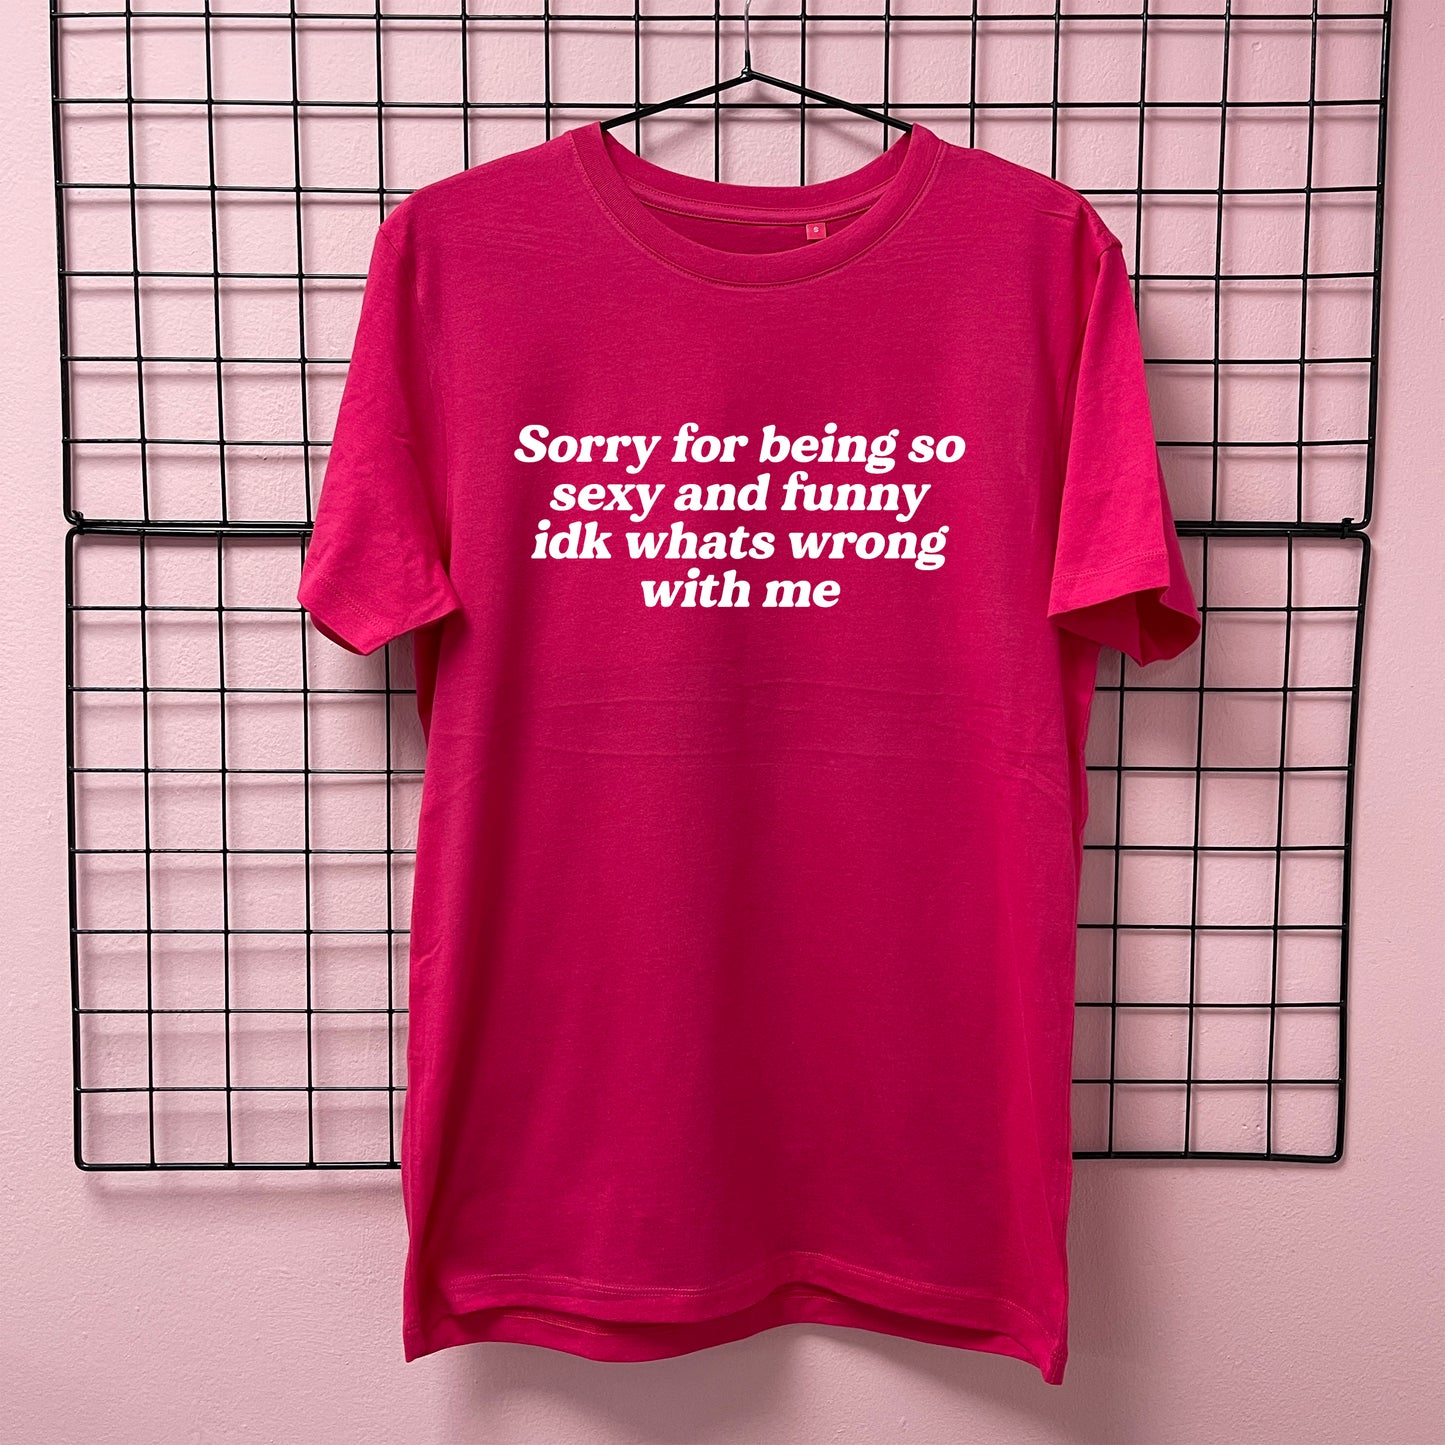 SORRY FOR BEING SO SEXY T-SHIRT